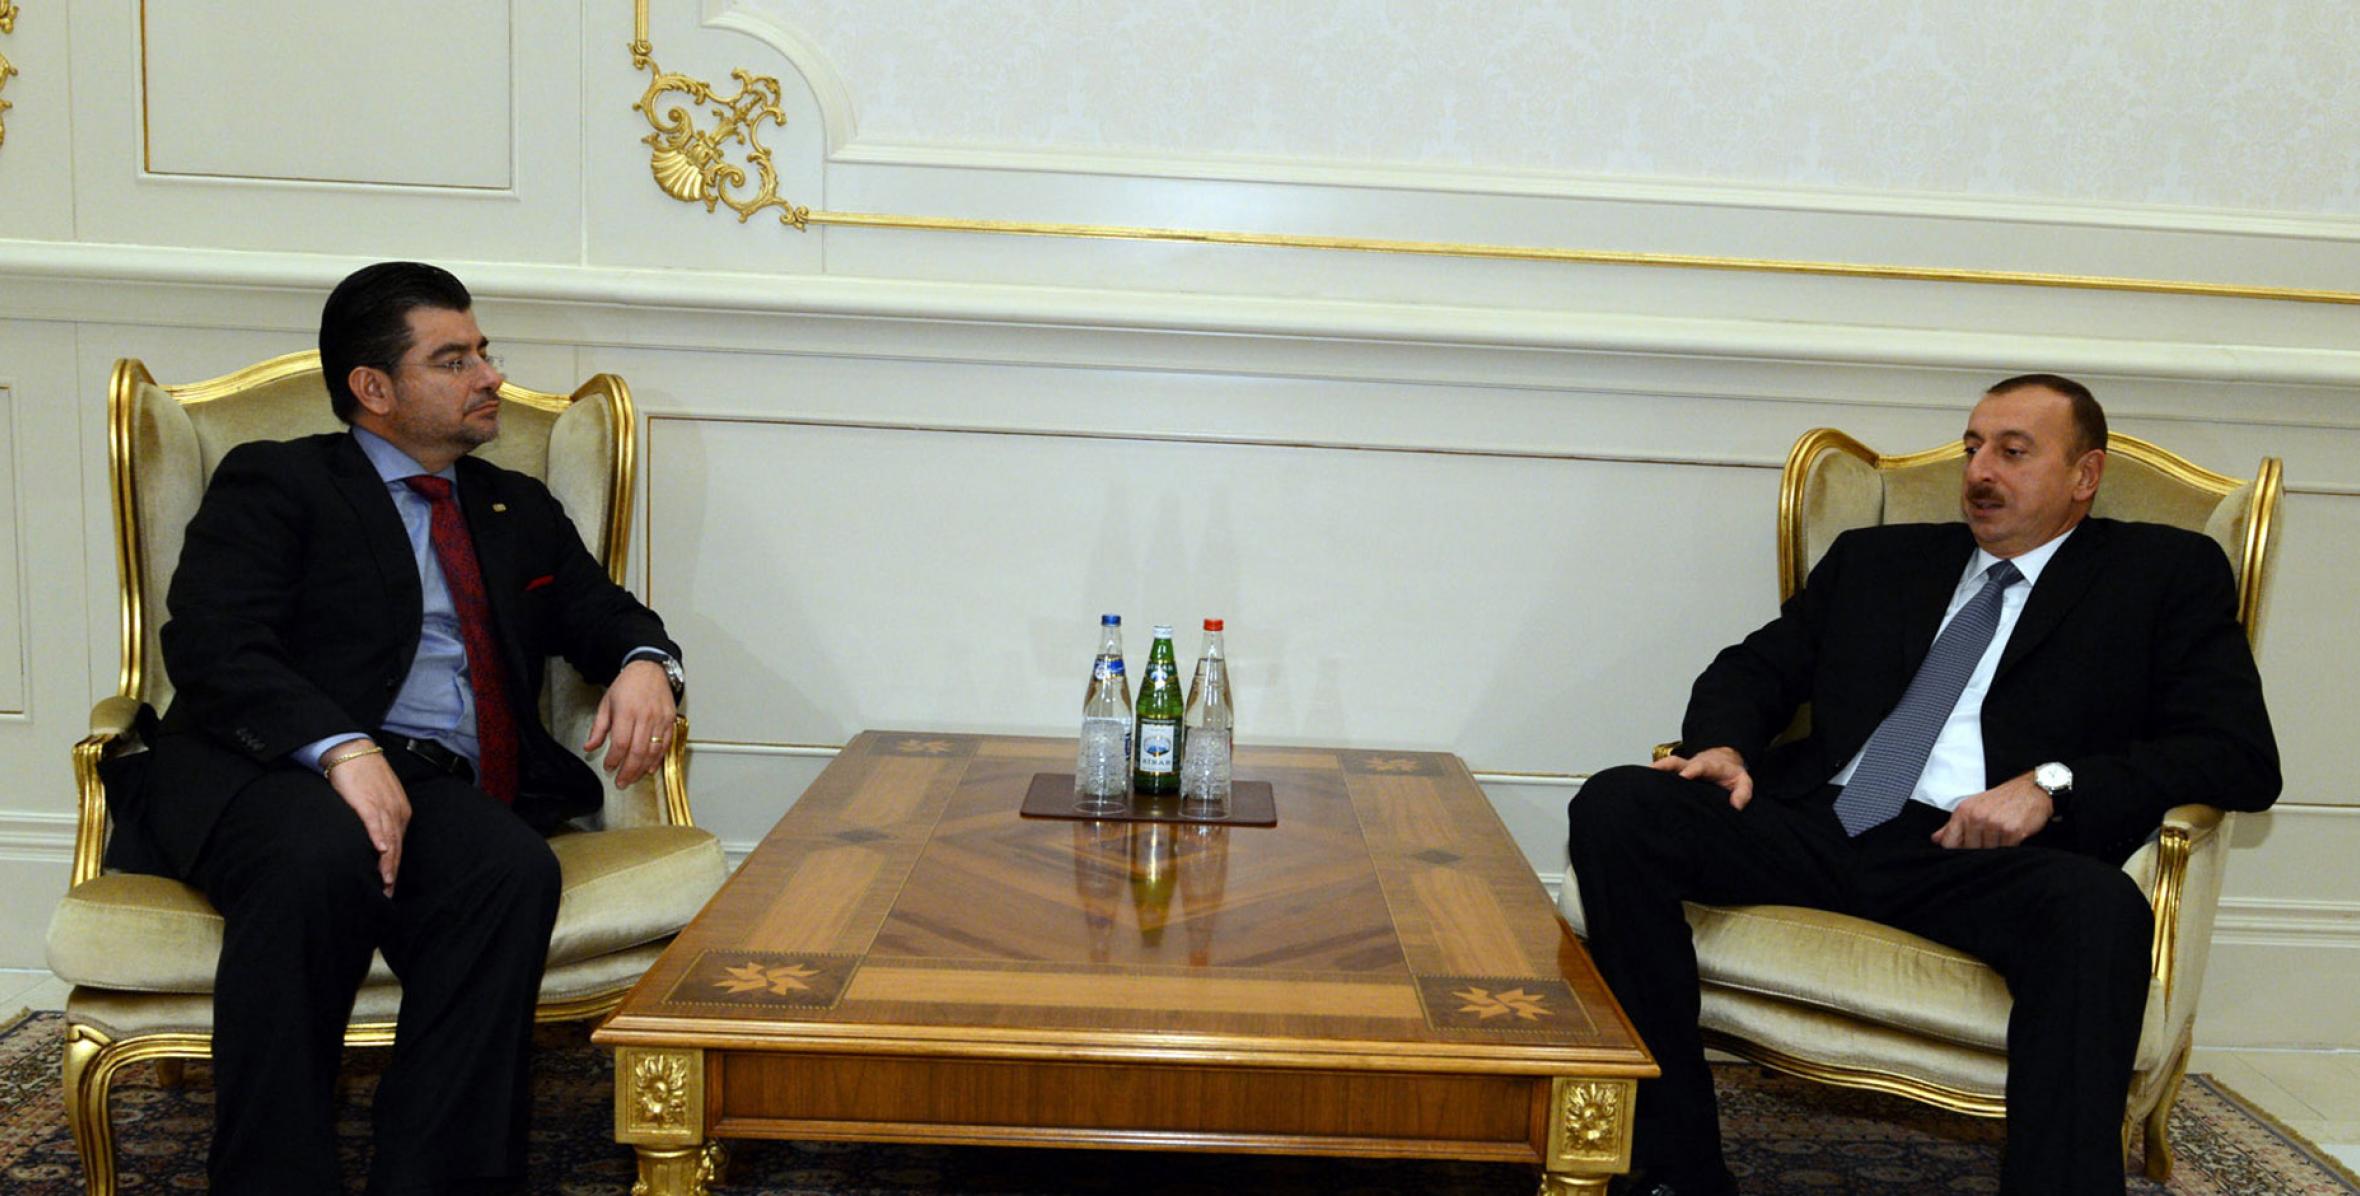 Ilham Aliyev accepted the credentials from the newly-appointed Ambassador of Ecuador to Azerbaijan